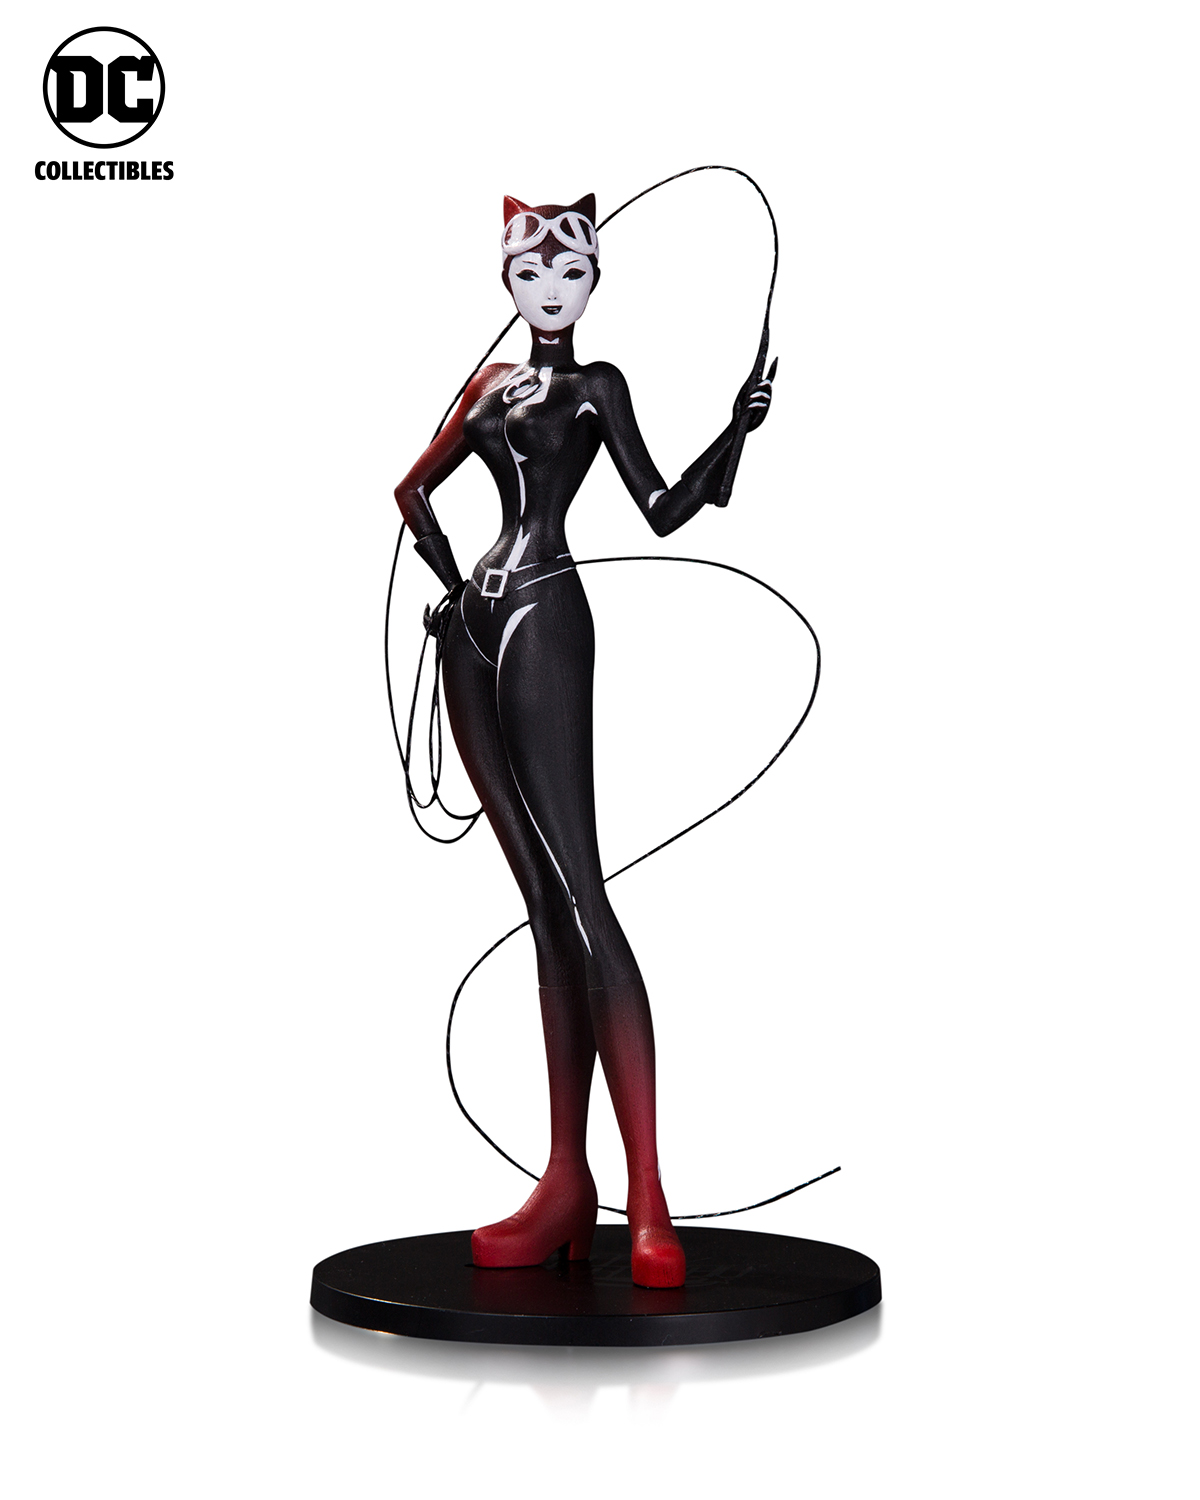 Dc_artist_alley_murase_catwoman